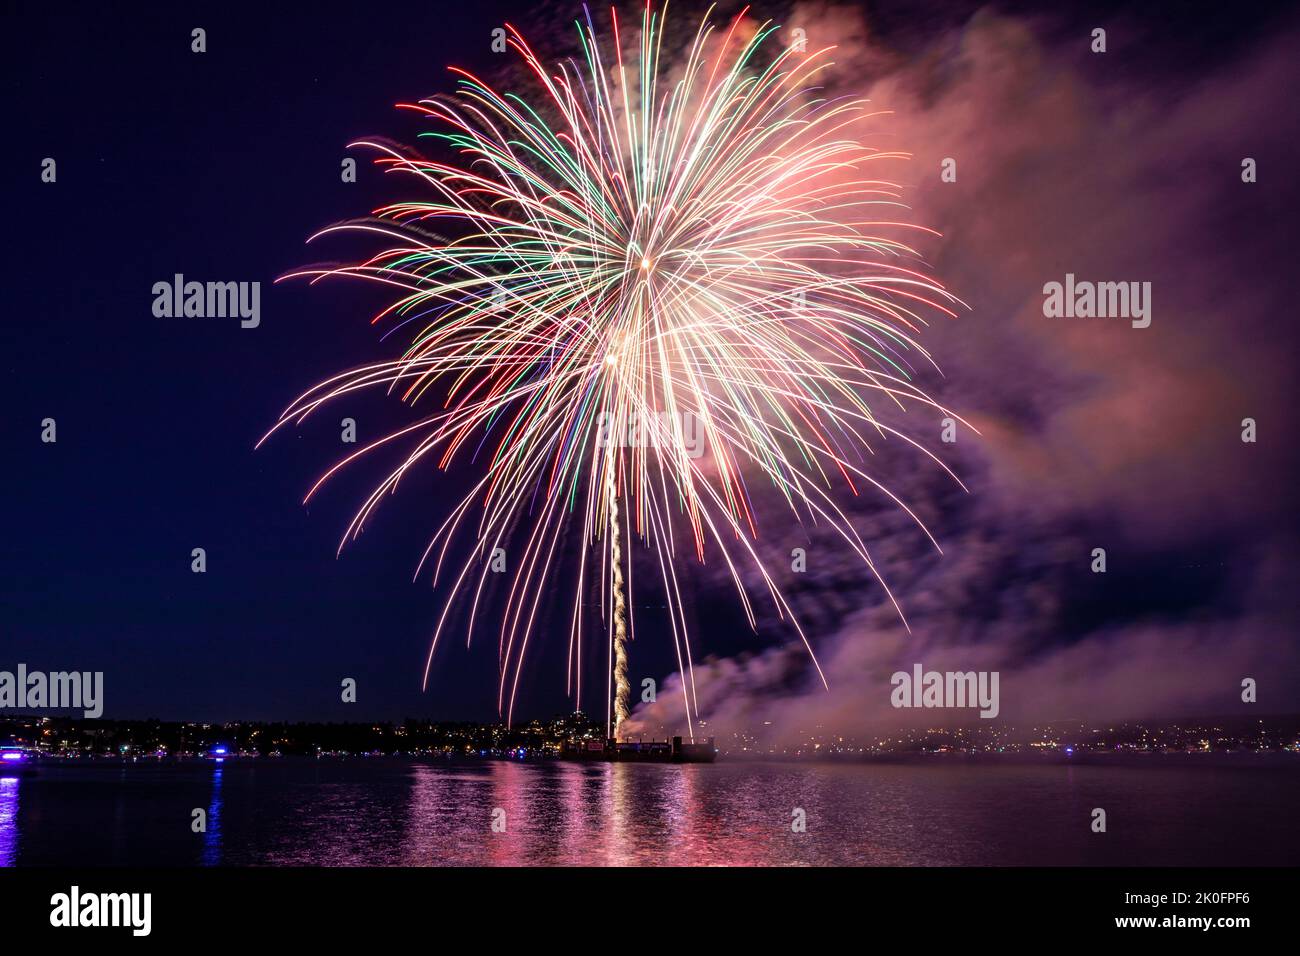 Celebration of light fireworks at the English Bay in Vancouver, Canada Stock Photo